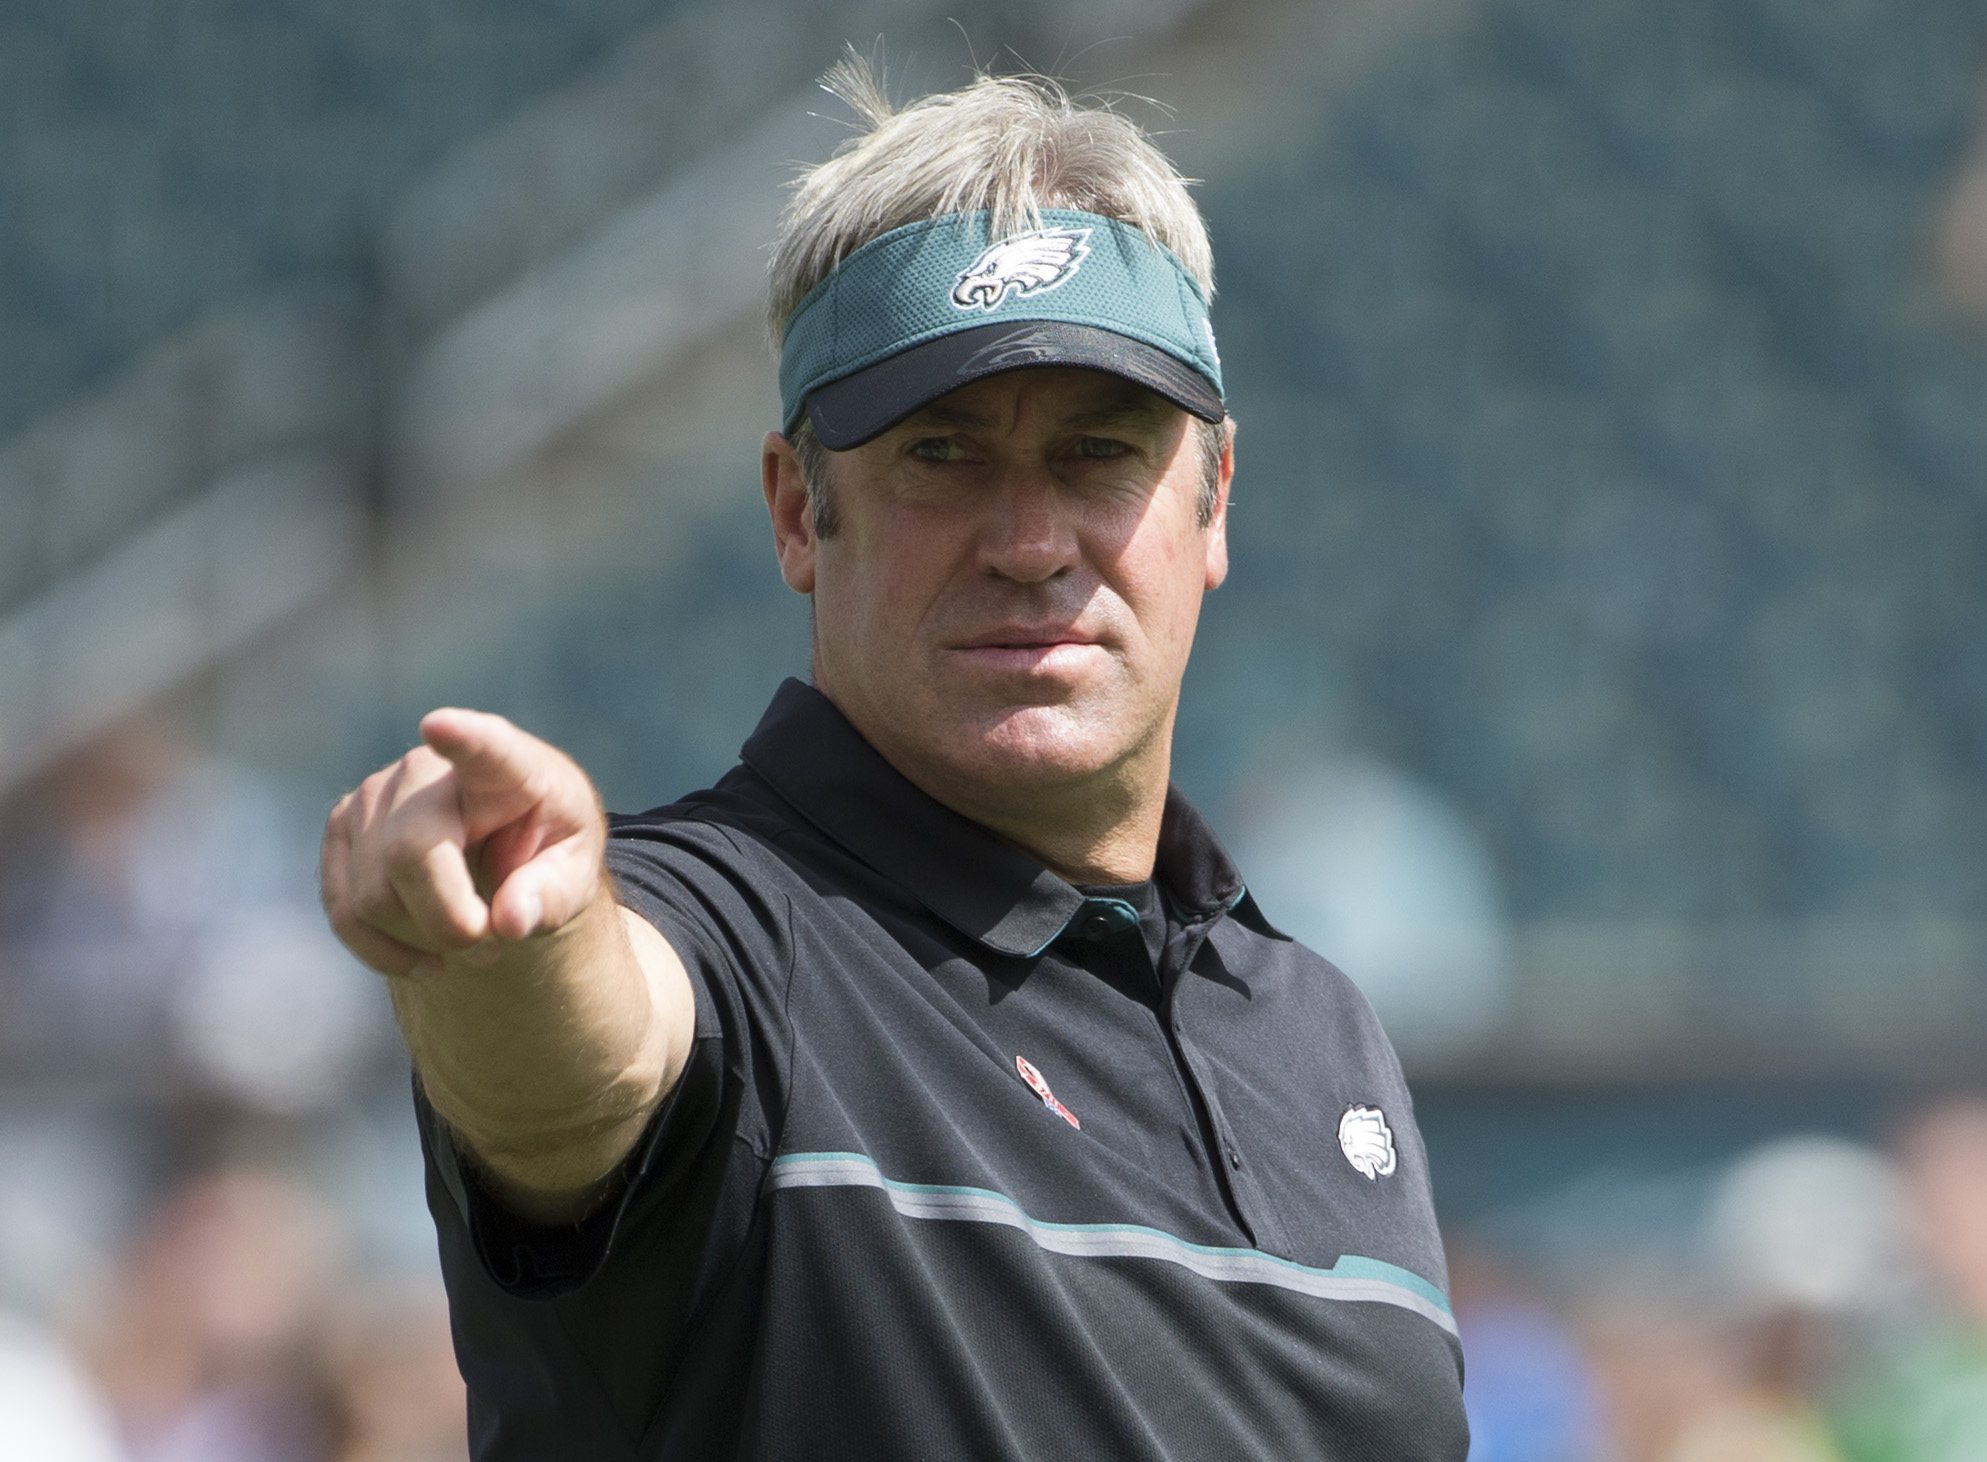 Doug Pederson points out at the field.